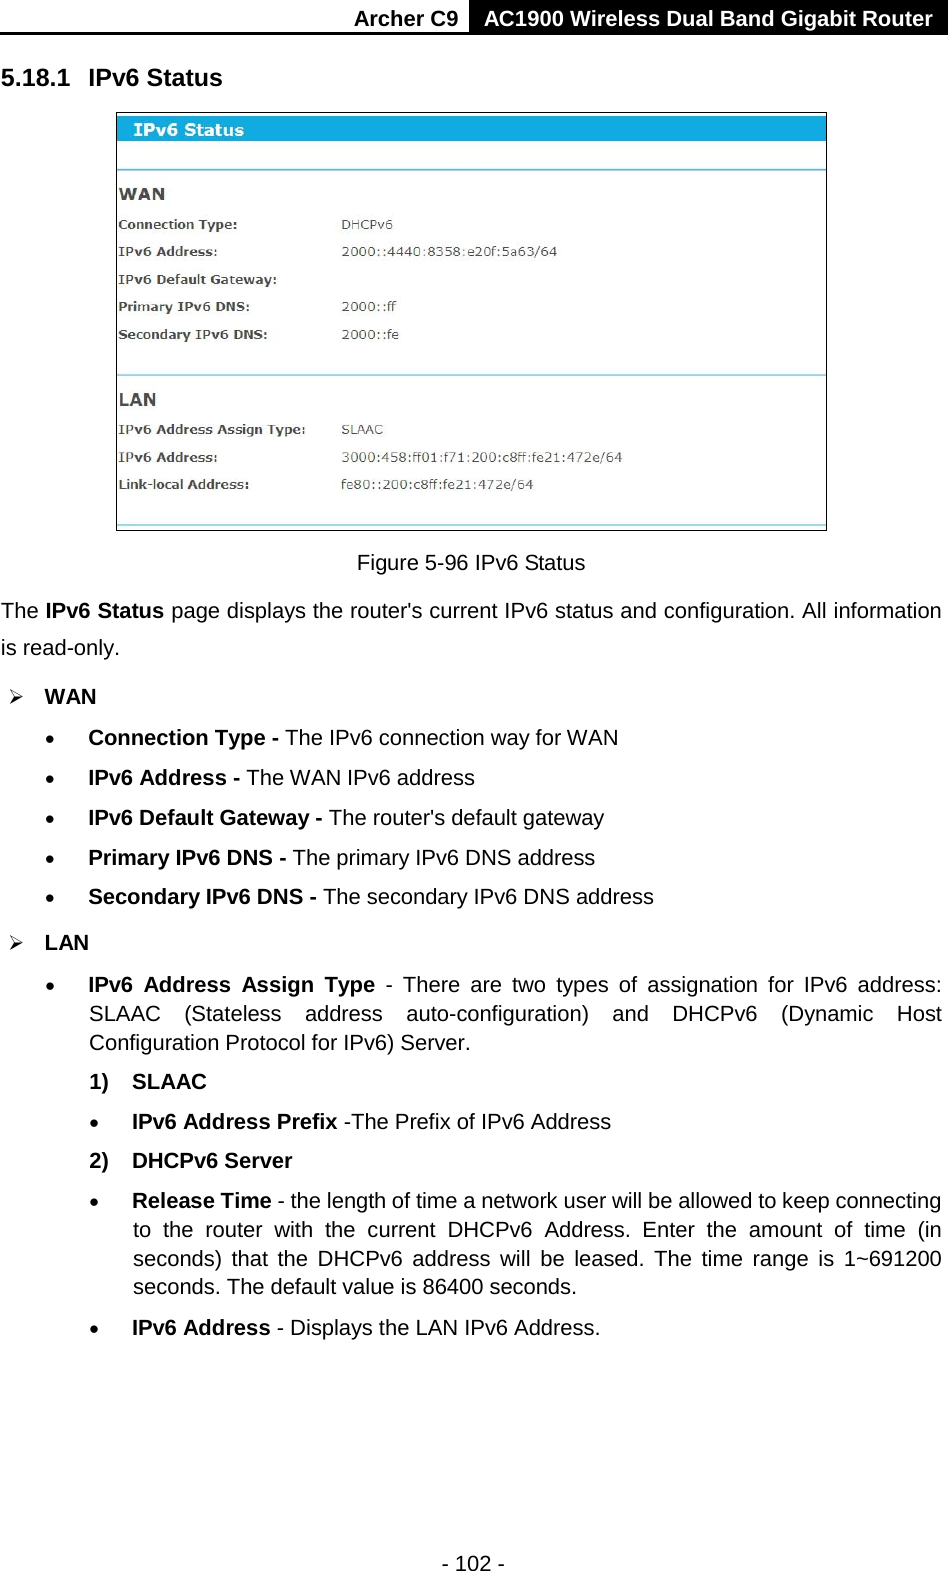 Archer C9 AC1900 Wireless Dual Band Gigabit Router  5.18.1 IPv6 Status  Figure 5-96 IPv6 Status The IPv6 Status page displays the router&apos;s current IPv6 status and configuration. All information is read-only.    WAN   • Connection Type - The IPv6 connection way for WAN • IPv6 Address - The WAN IPv6 address • IPv6 Default Gateway - The router&apos;s default gateway • Primary IPv6 DNS - The primary IPv6 DNS address • Secondary IPv6 DNS - The secondary IPv6 DNS address  LAN • IPv6 Address Assign Type  -  There are two types of assignation for IPv6 address: SLAAC (Stateless address auto-configuration) and DHCPv6 (Dynamic Host Configuration Protocol for IPv6) Server. 1) SLAAC • IPv6 Address Prefix -The Prefix of IPv6 Address 2) DHCPv6 Server • Release Time - the length of time a network user will be allowed to keep connecting to the router with the current DHCPv6 Address. Enter the amount of time (in seconds) that the DHCPv6 address will be leased. The time range is 1~691200 seconds. The default value is 86400 seconds. • IPv6 Address - Displays the LAN IPv6 Address. - 102 - 